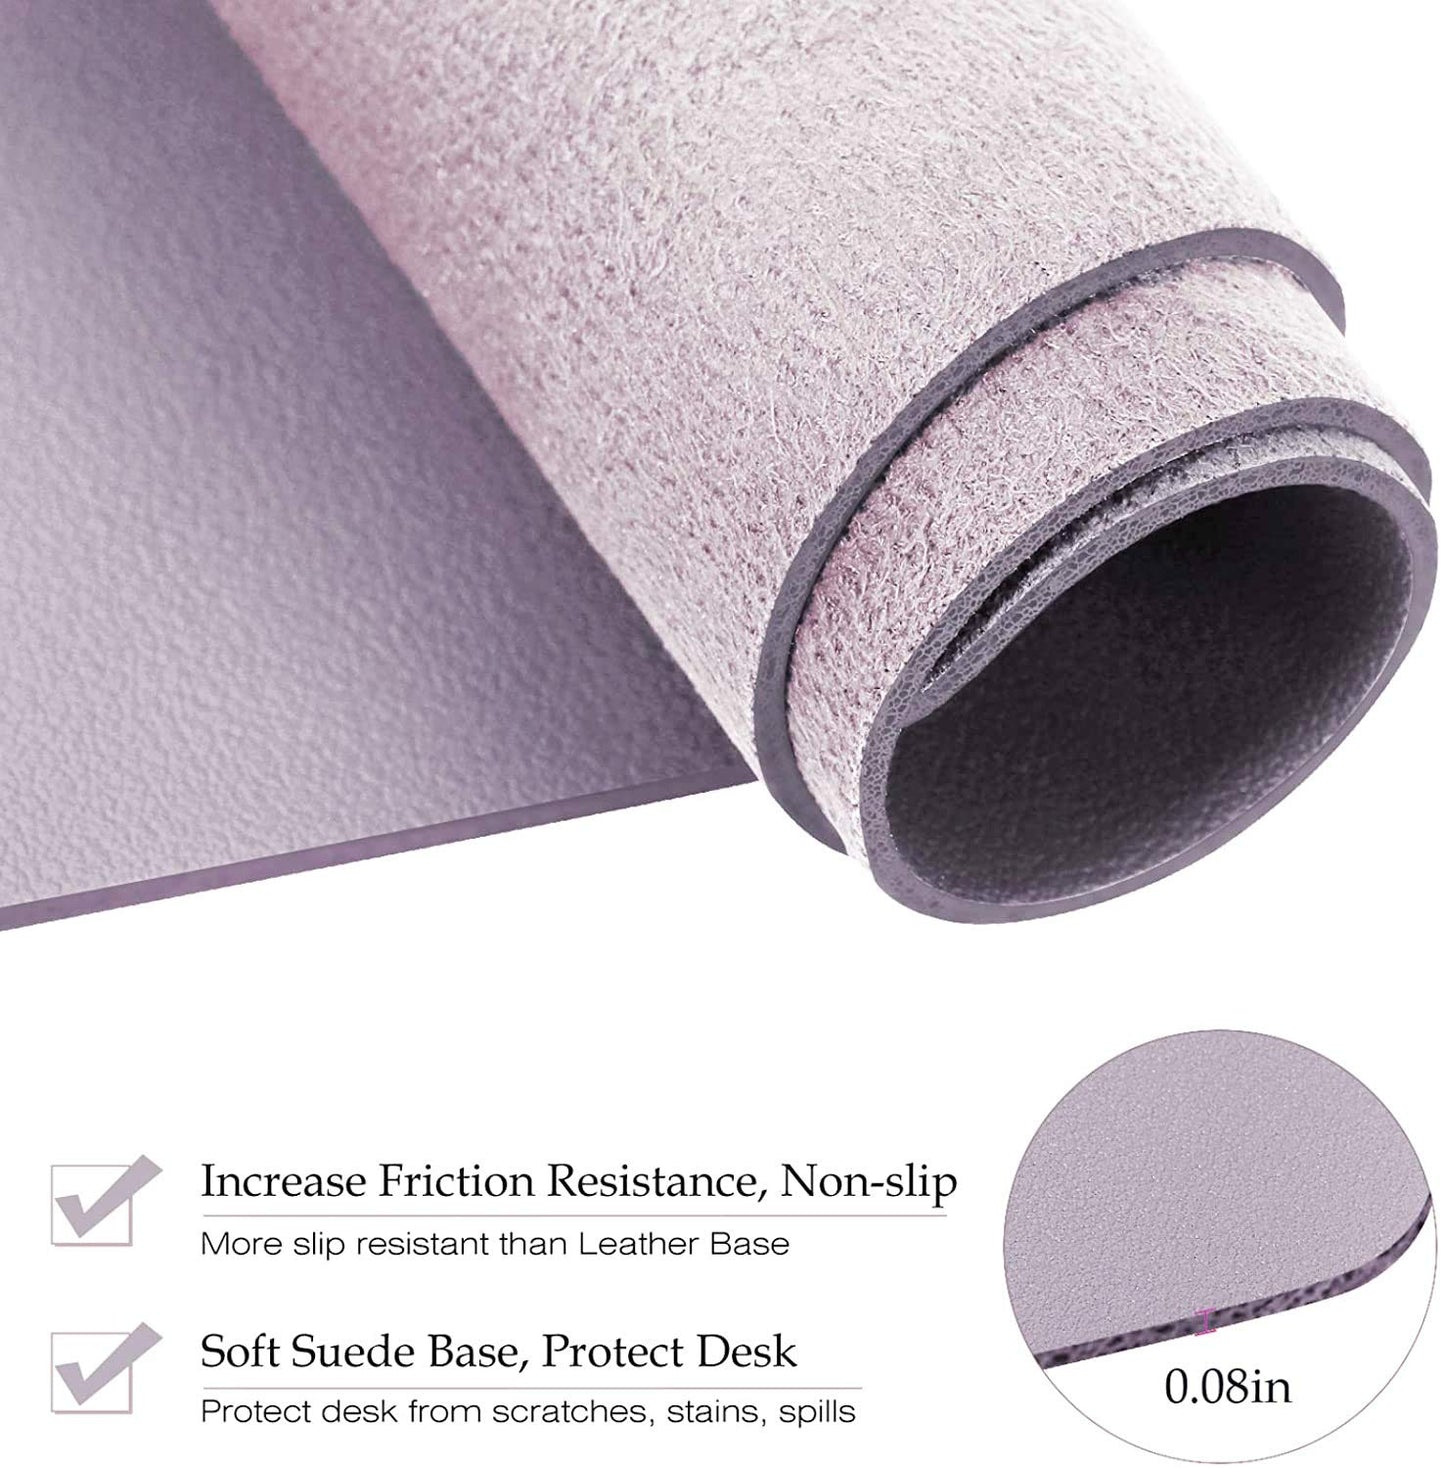 PU Leather Desk Pad Protector,Mouse Pad,Office Desk Mat, Non-Slip Desk Blotter,Laptop Desk Pad, Waterproof Desk Writing Pad for Office and Home - Light Grey